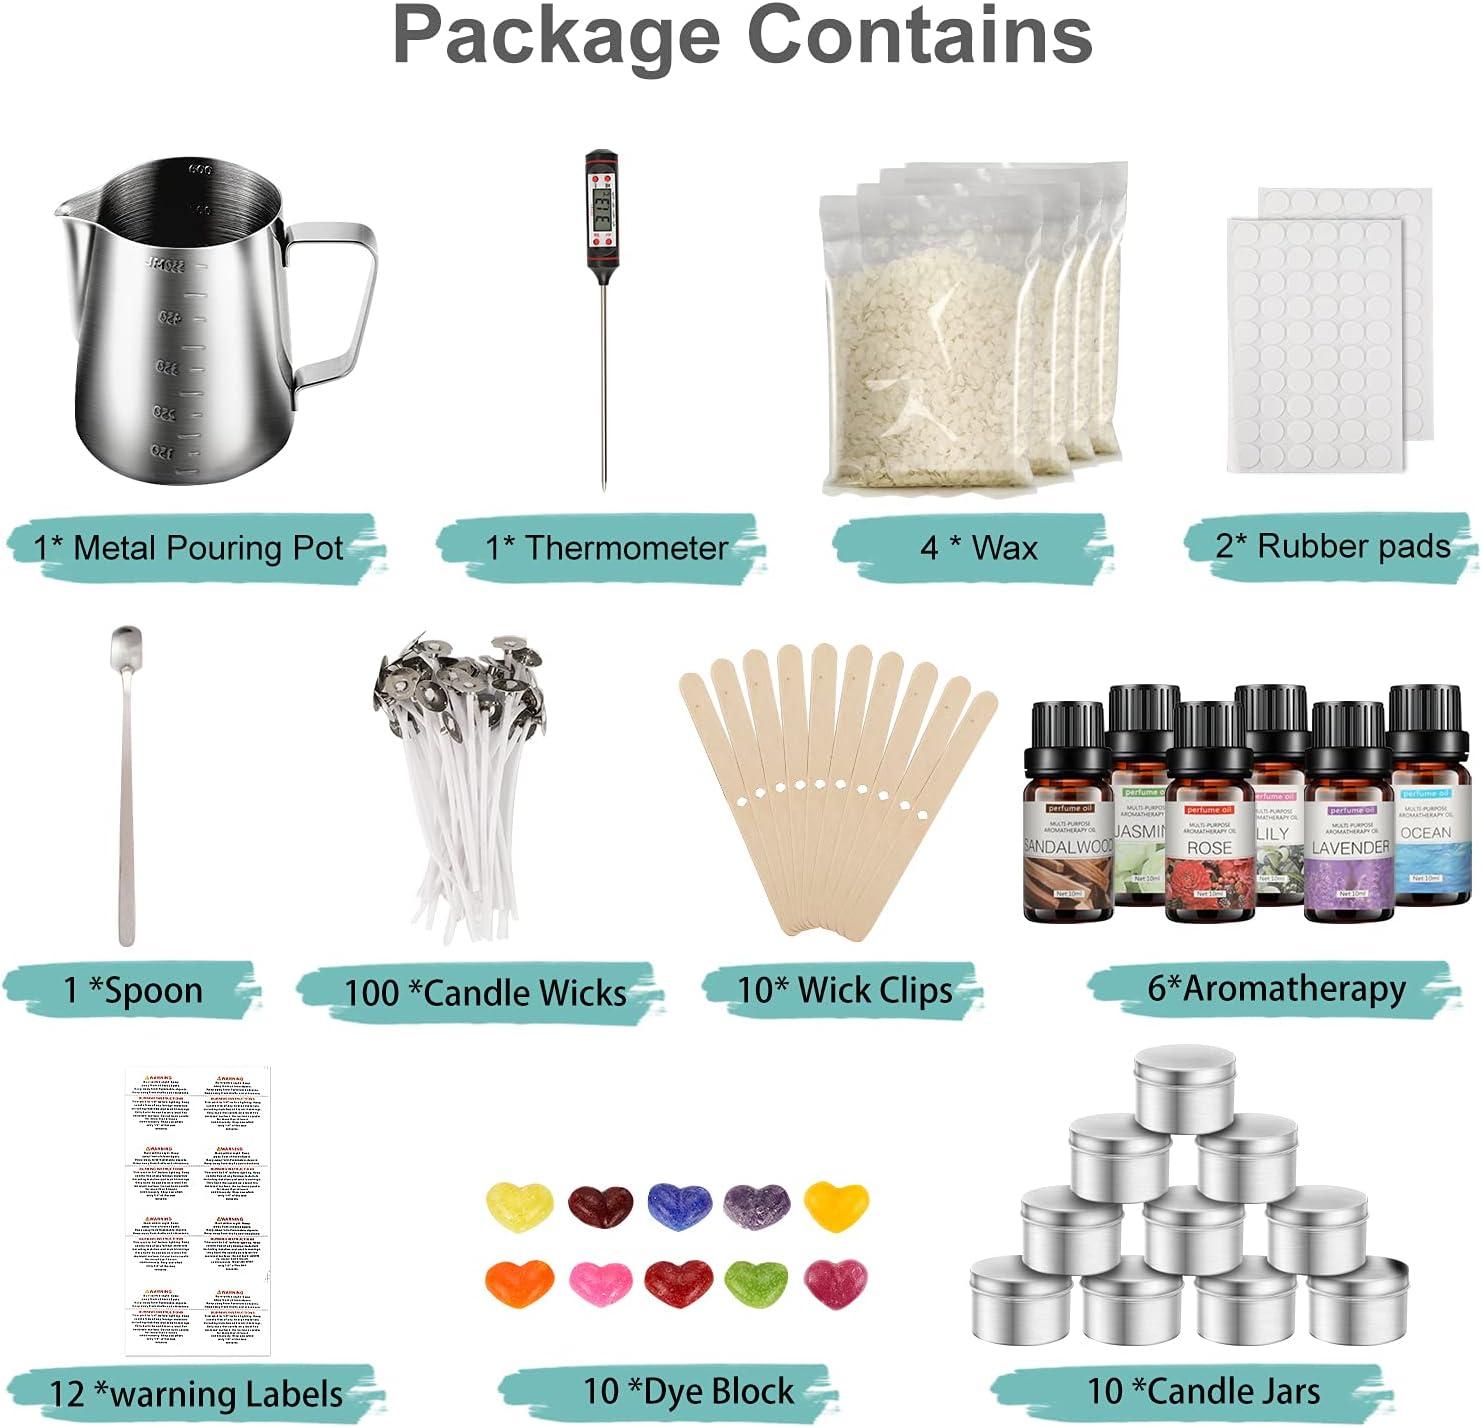 DIY Candle Making Kit for Adults,Beginners & Kids The DIY Arts